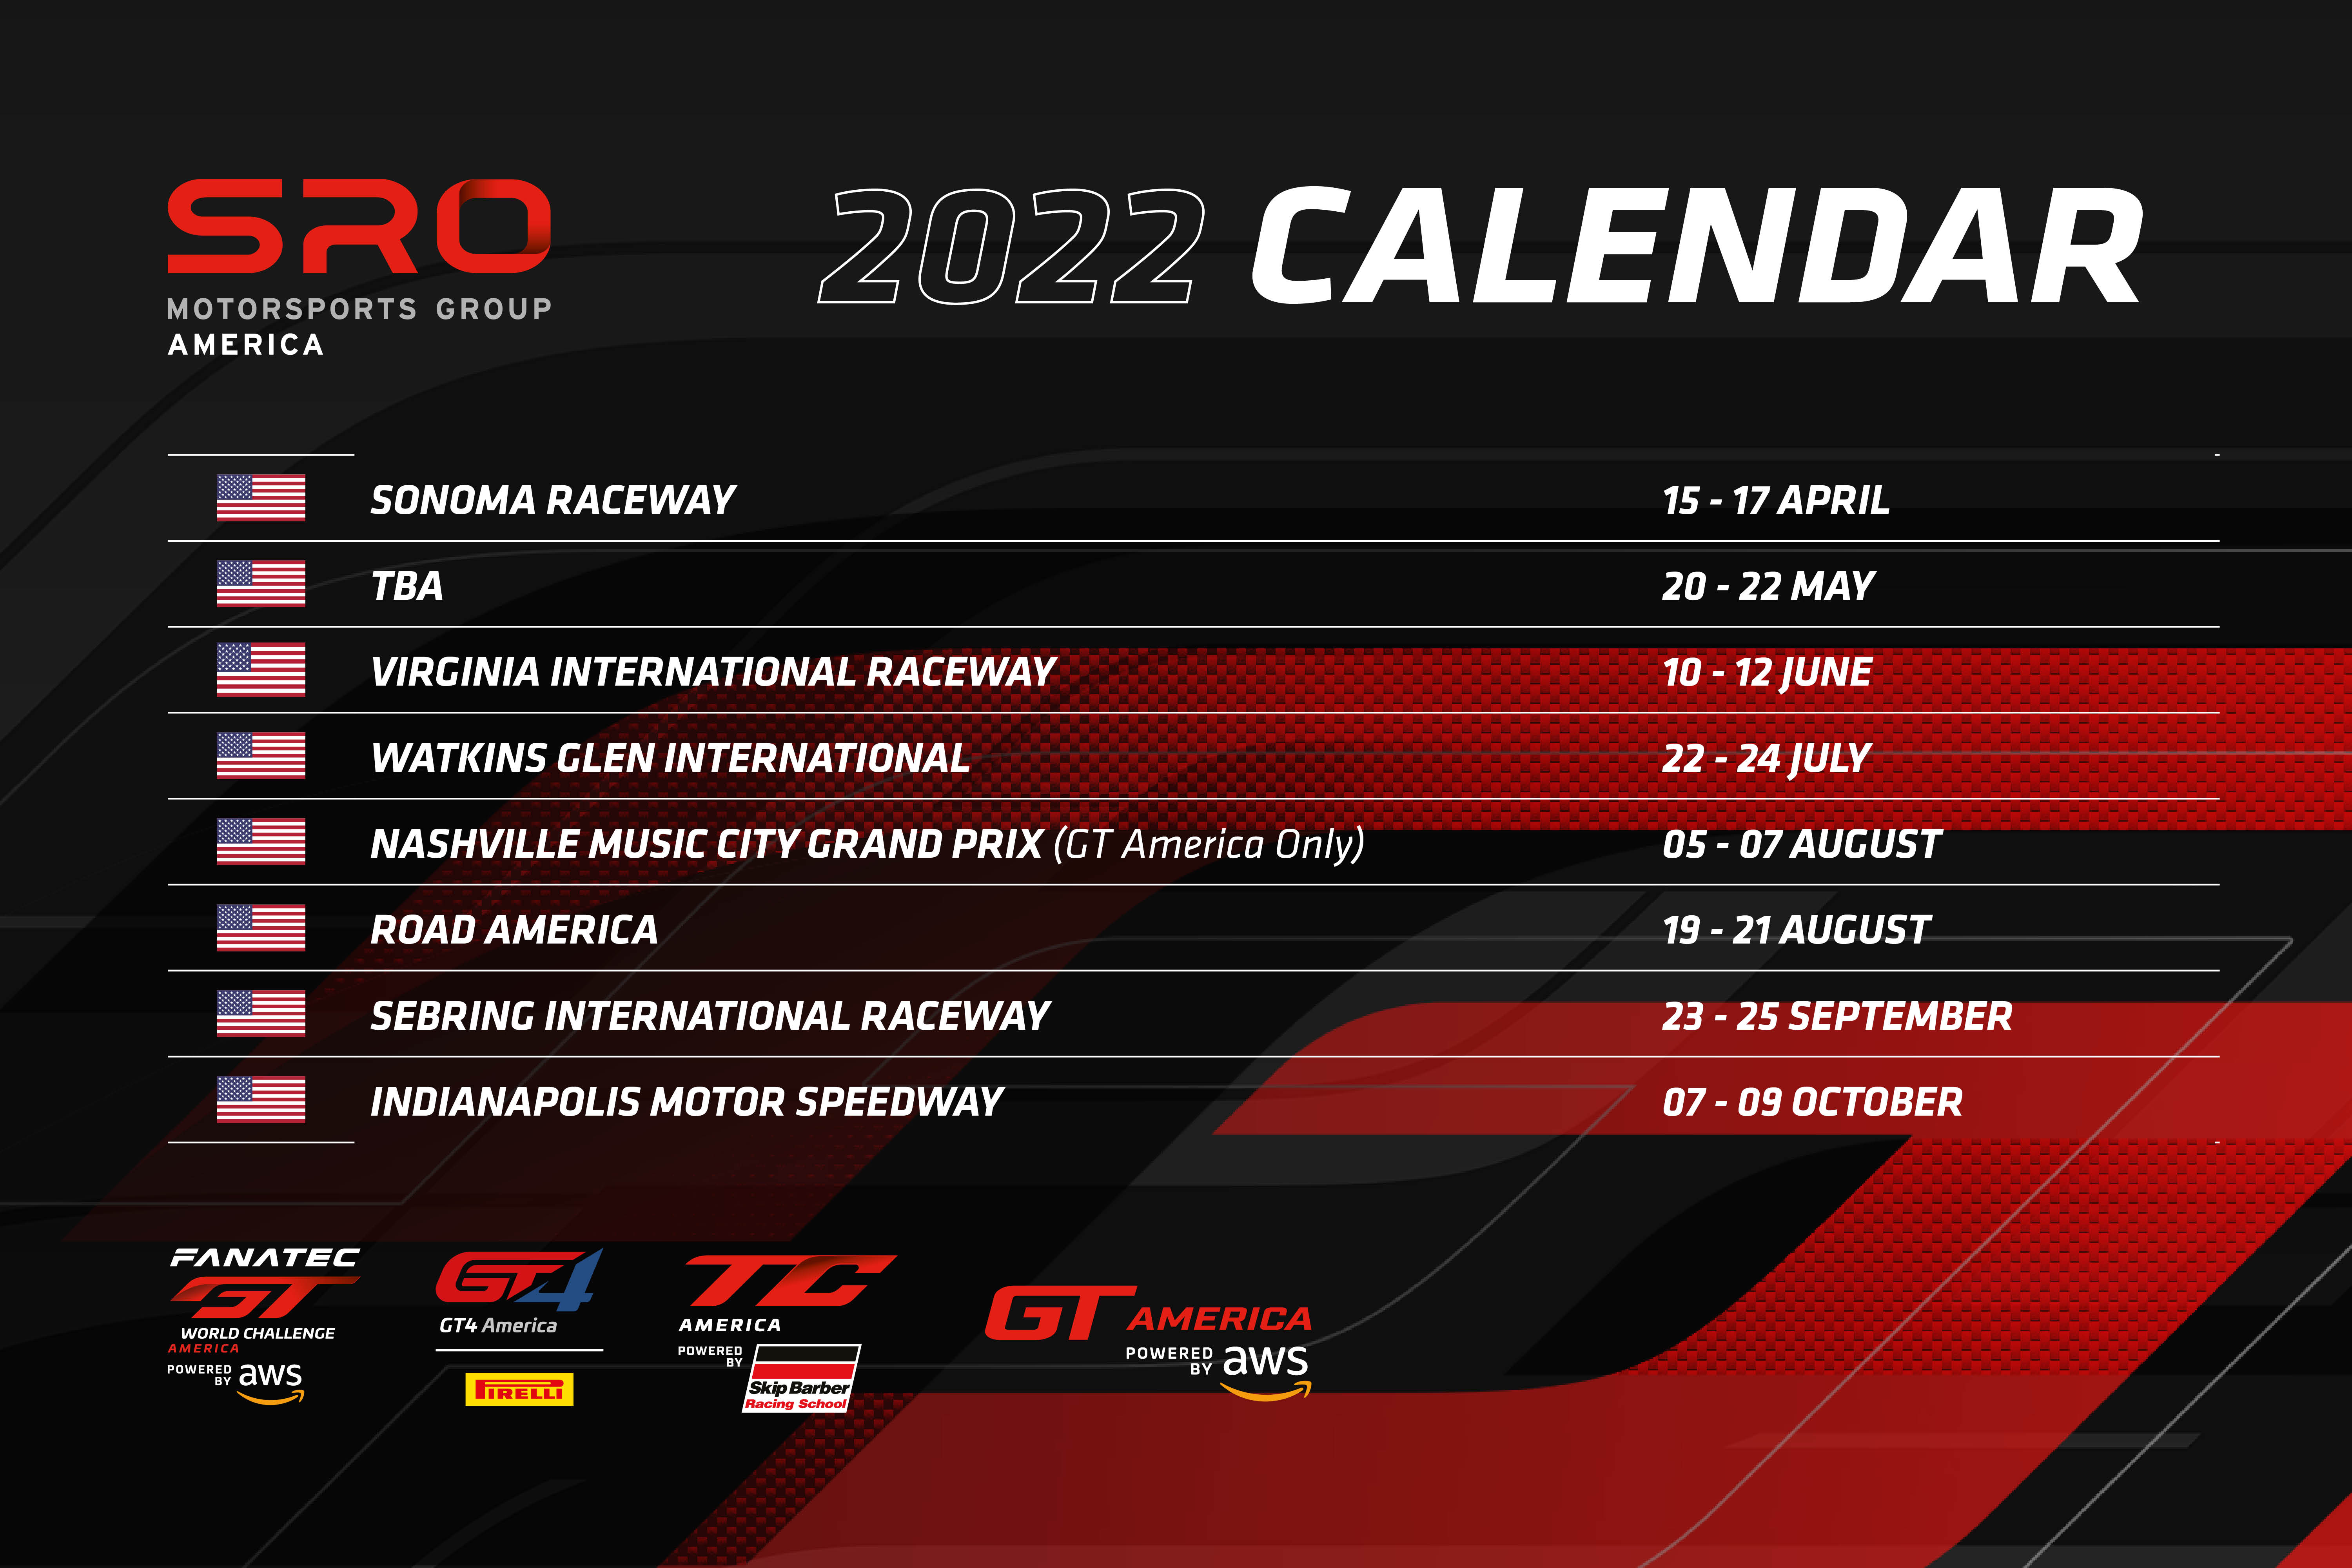 European and American series among first set of 2022 calendars